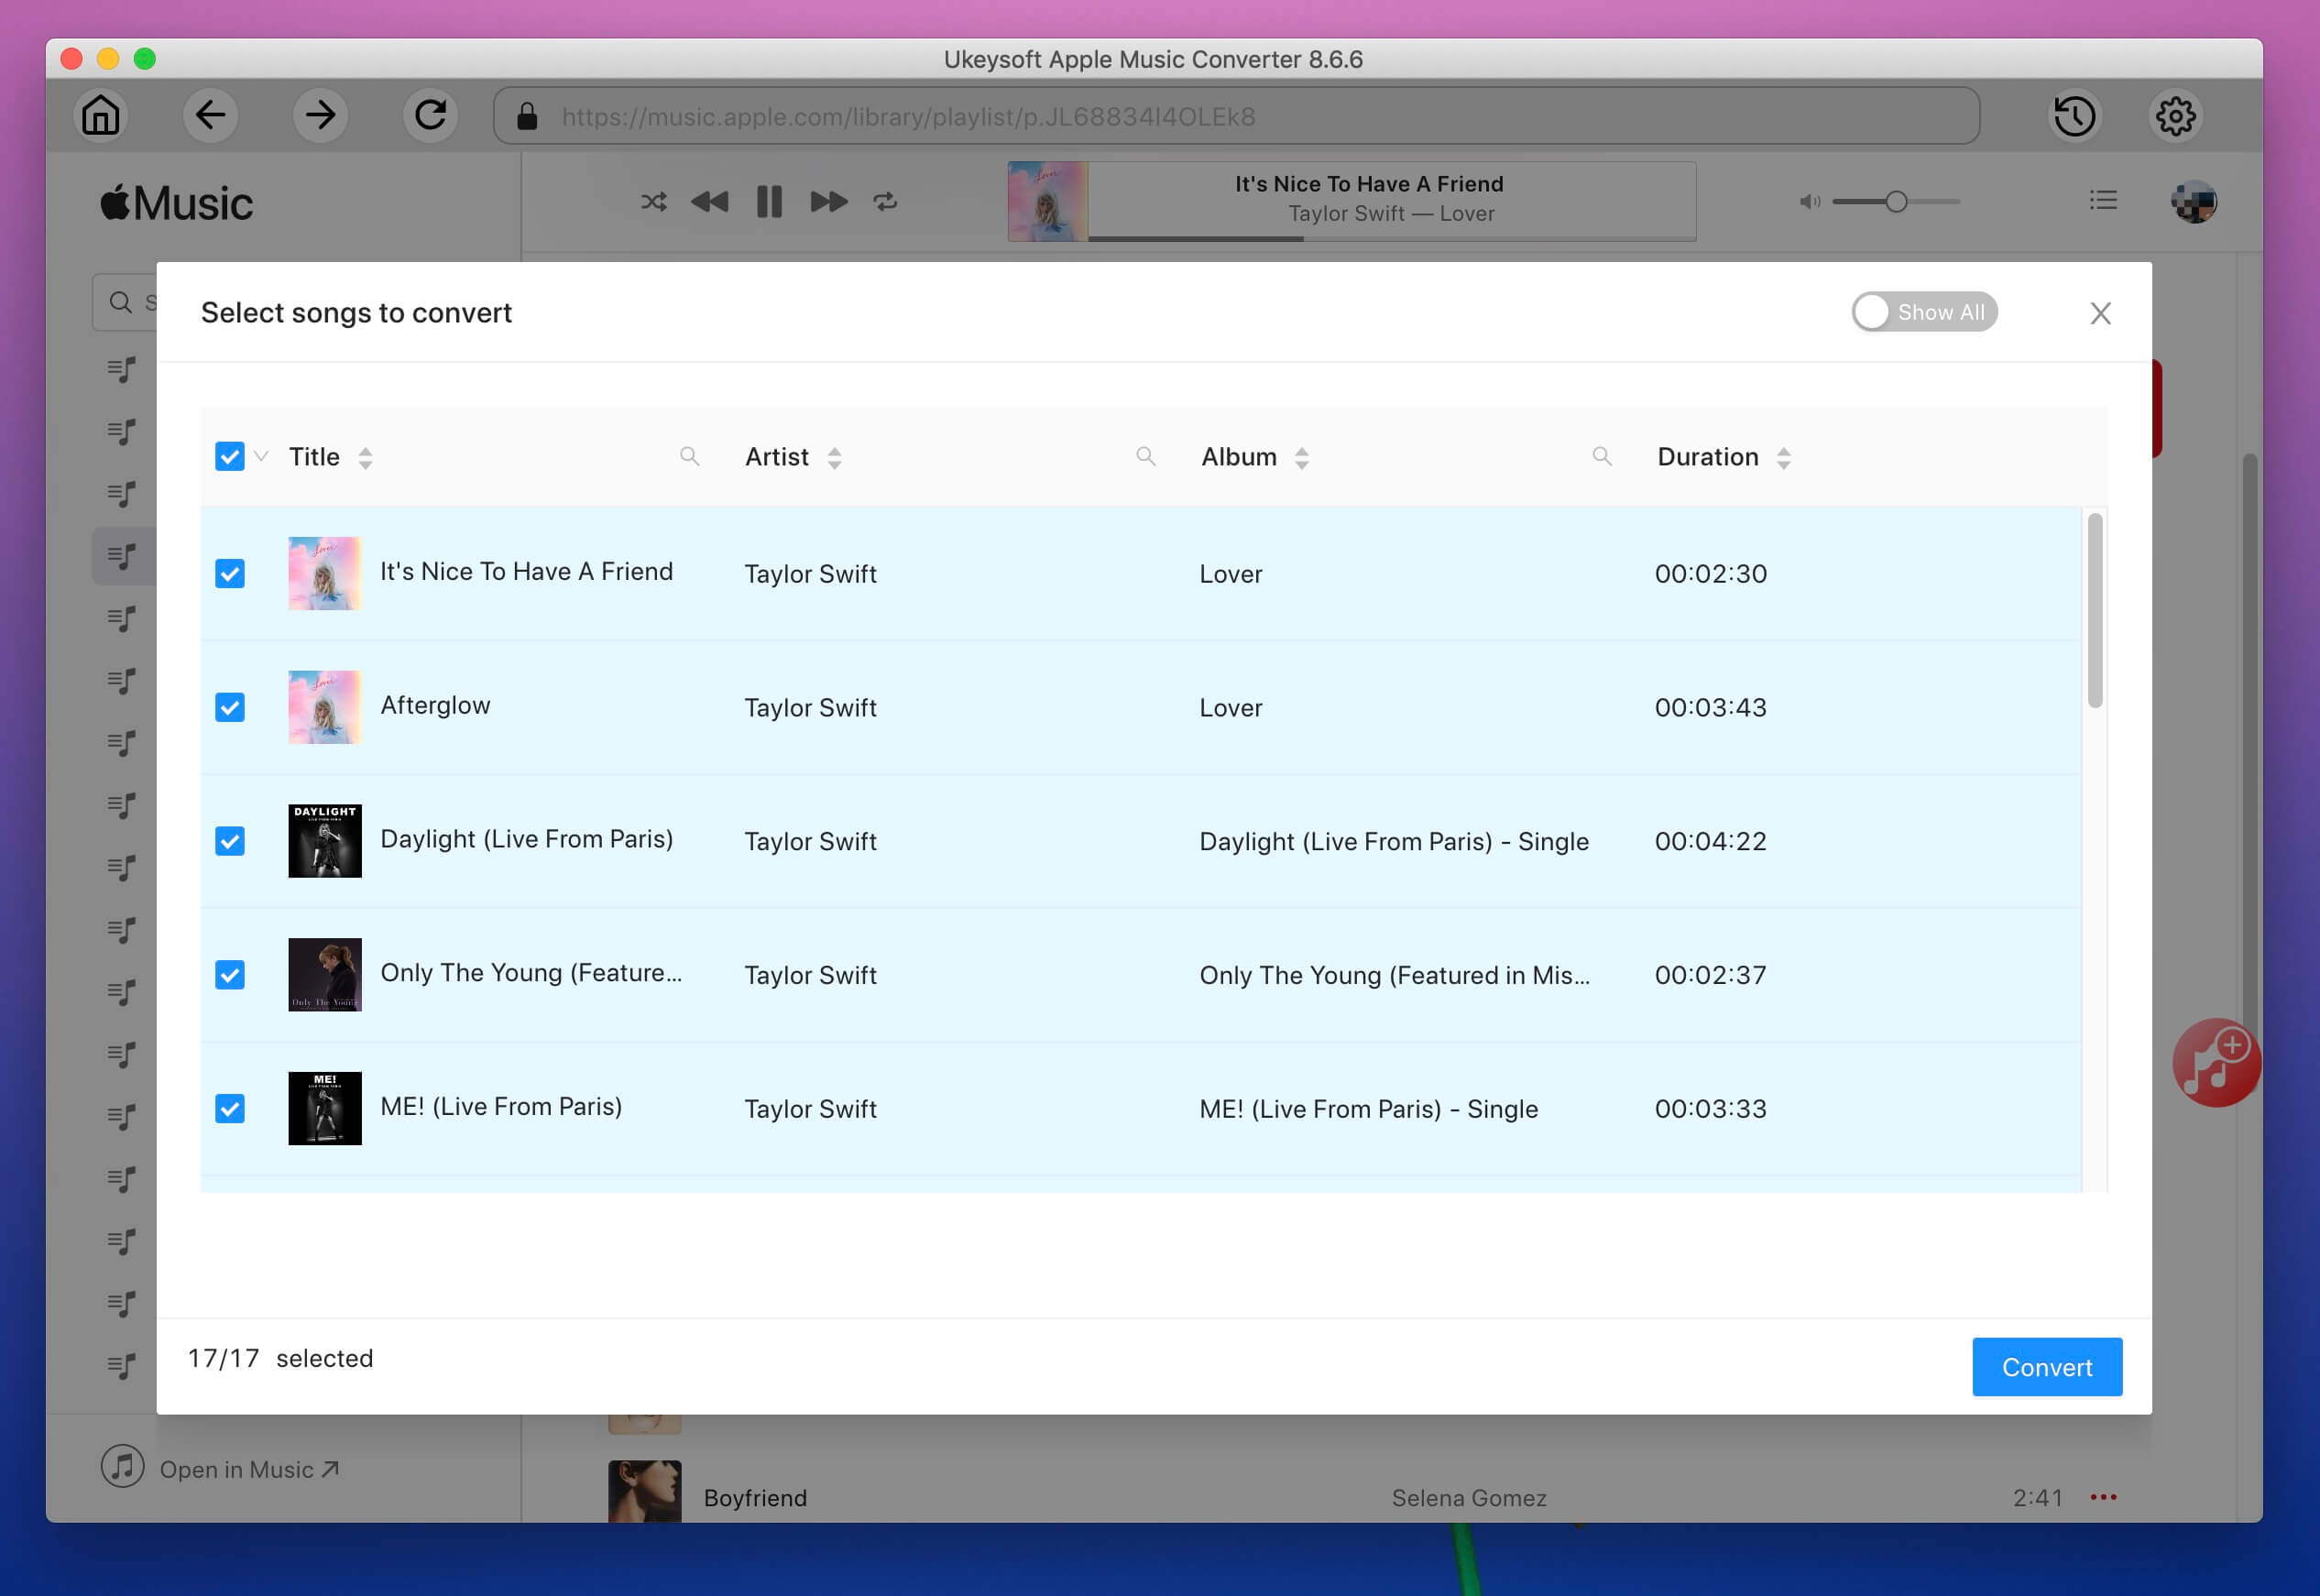 drm removal software itunes 10.13